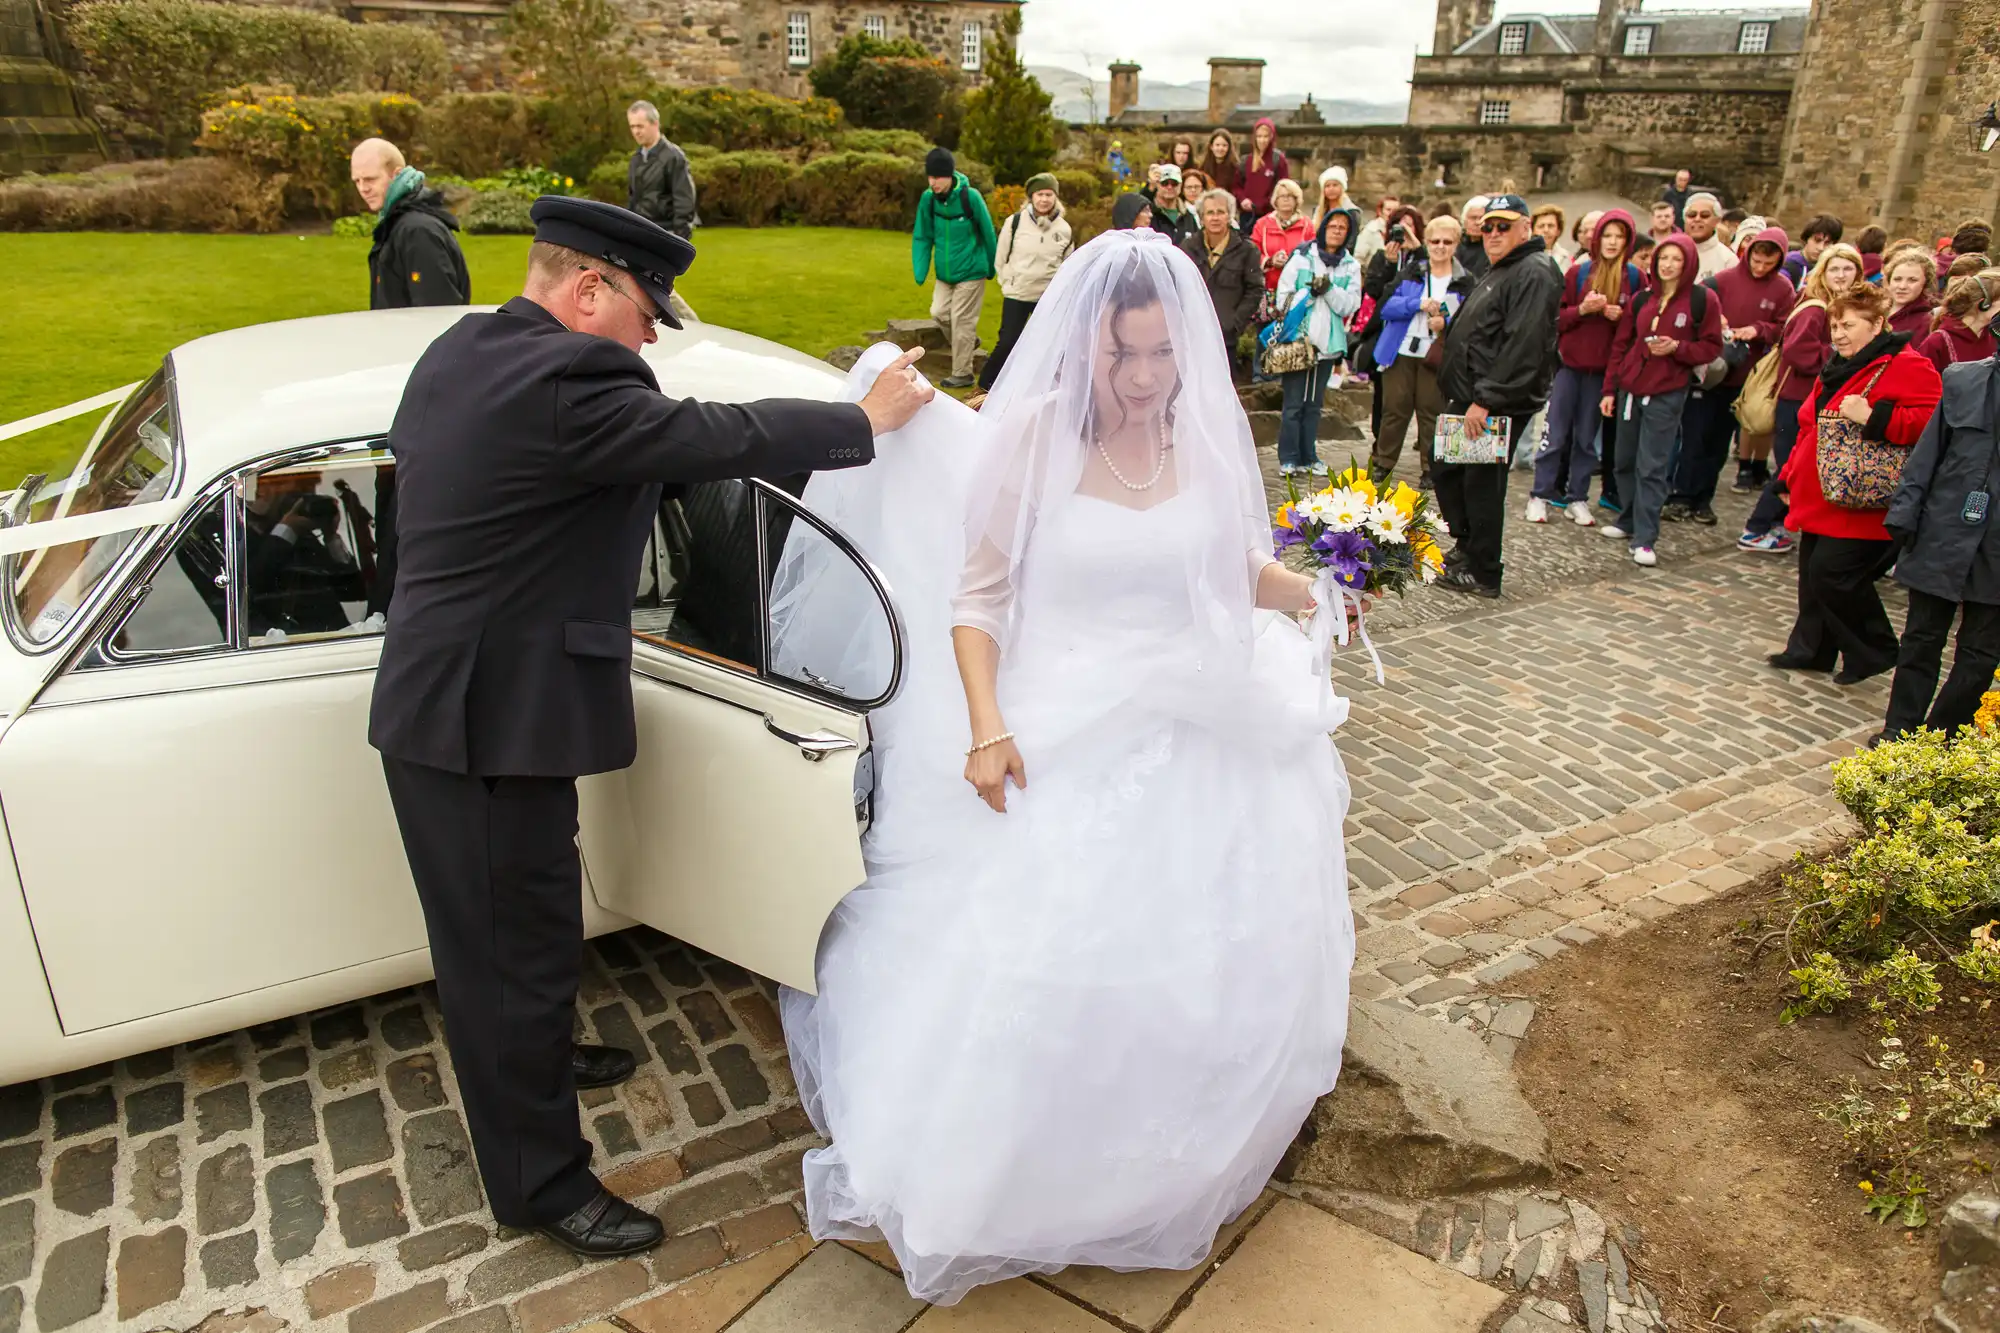 A bride in a white dress alighting from a classic car, assisted by a chauffeur in uniform, with onlookers in the background at an outdoor venue.